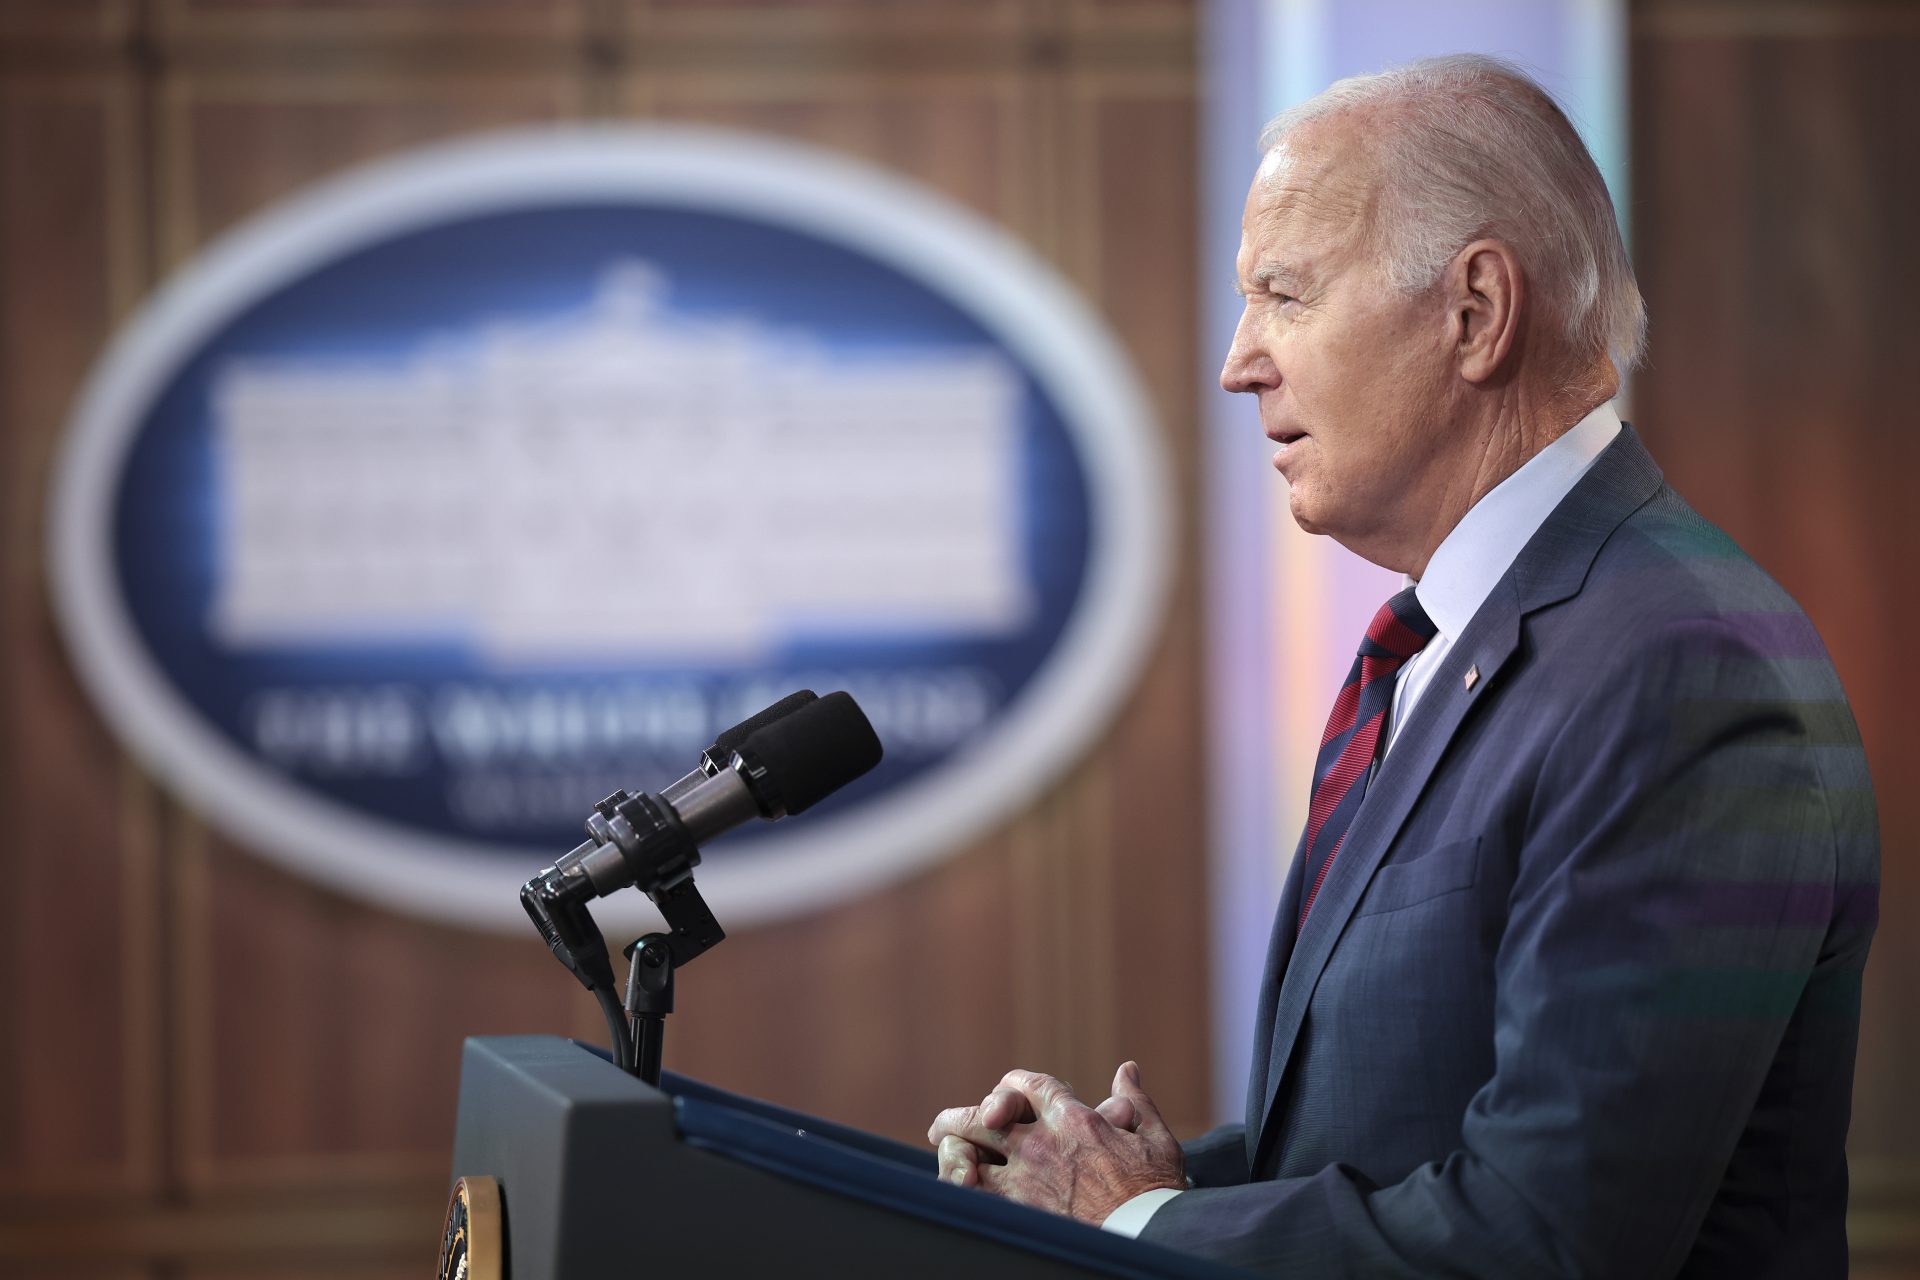 Joe Biden made big climate promises and he’s largely delivered on them